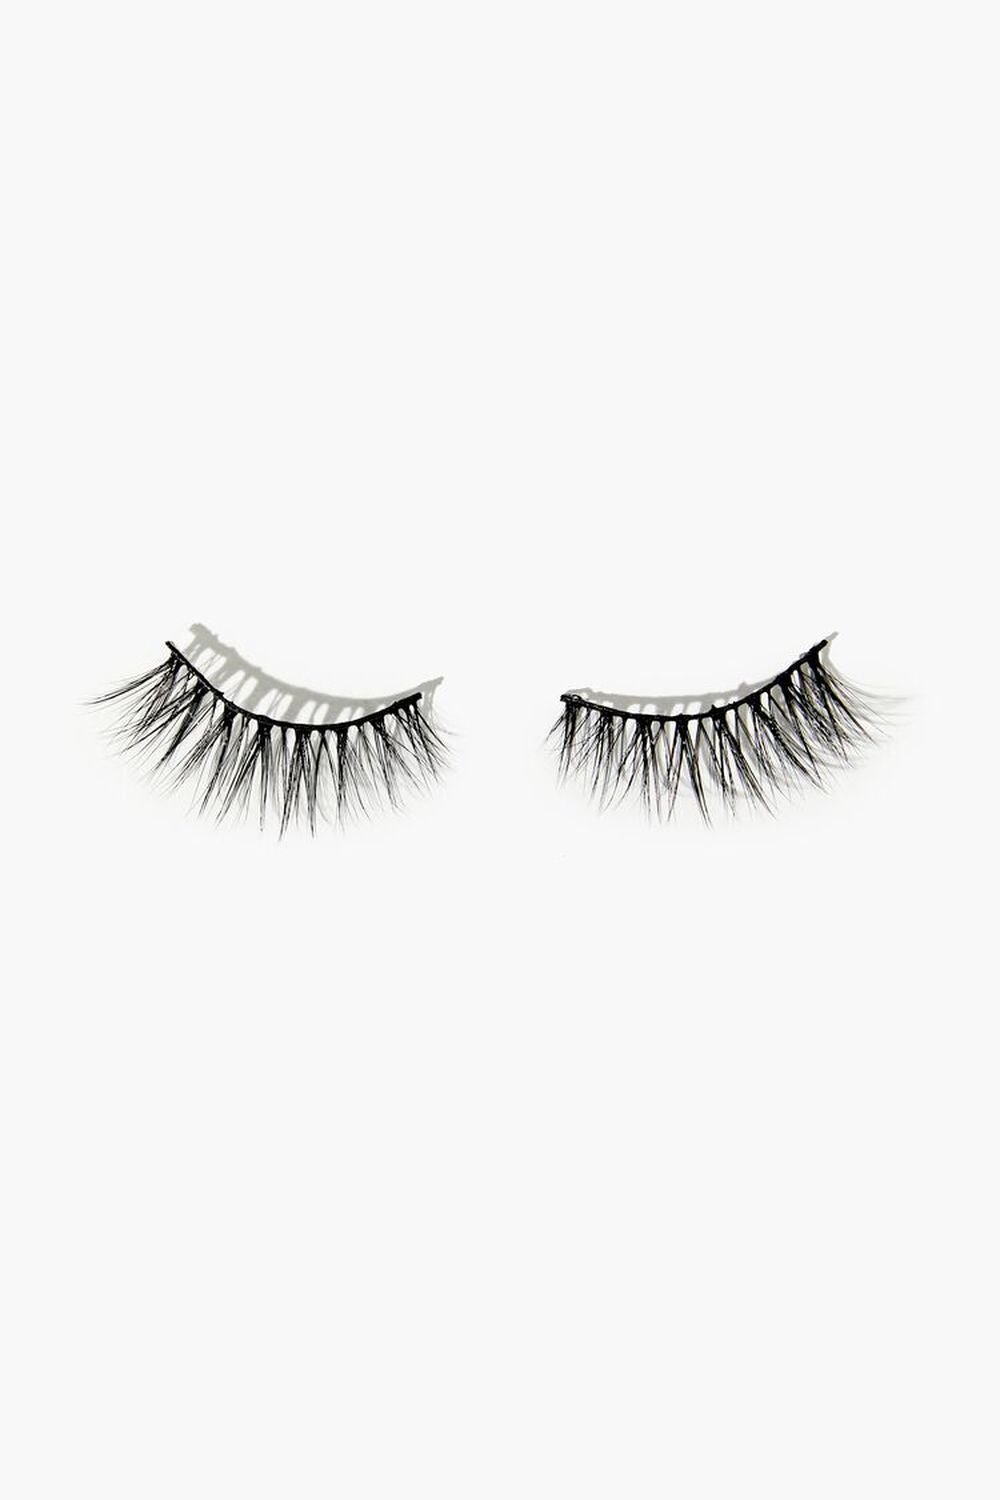 BLACK Ardell Magnetic Megahold Demi Wispies False Lashes, image 1